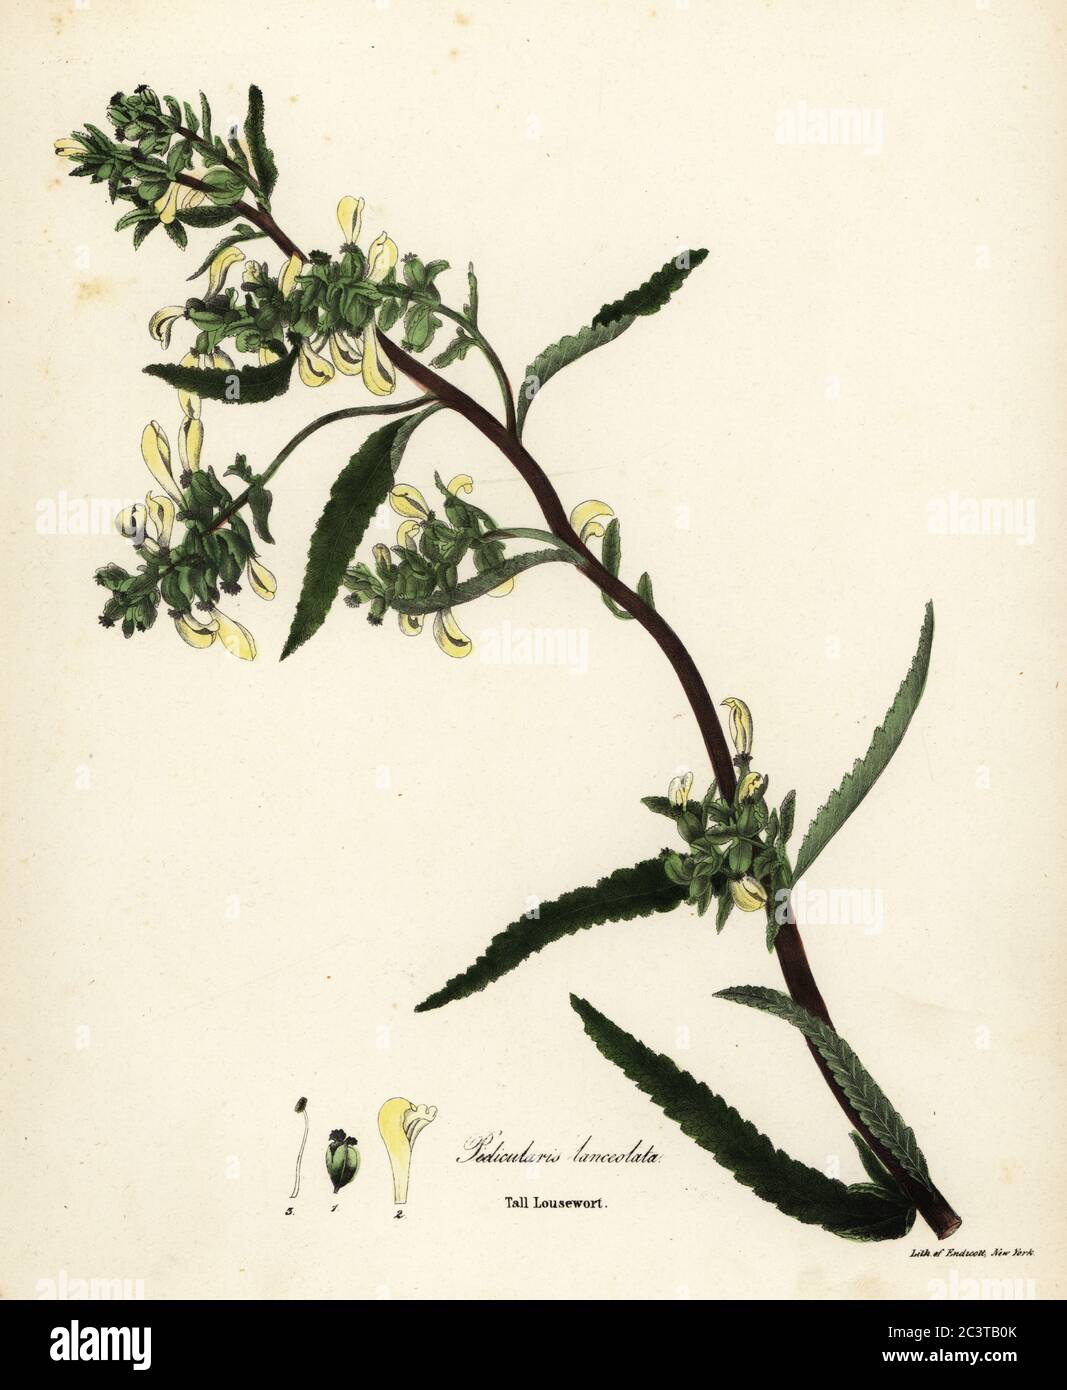 Tall lousewort or swamp lousewort, Pedicularis lanceolata. Handcoloured lithograph by Endicott after a botanical illustration from John Torrey’s A Flora of the State of New York, Carroll and Cook, Albany, 1843. The plates drawn by John Torrey, Agnes Mitchell, Elizabeth Paoley and Swinton. John Torrey was an American botanist, chemist and physician 1796-1873. Stock Photo